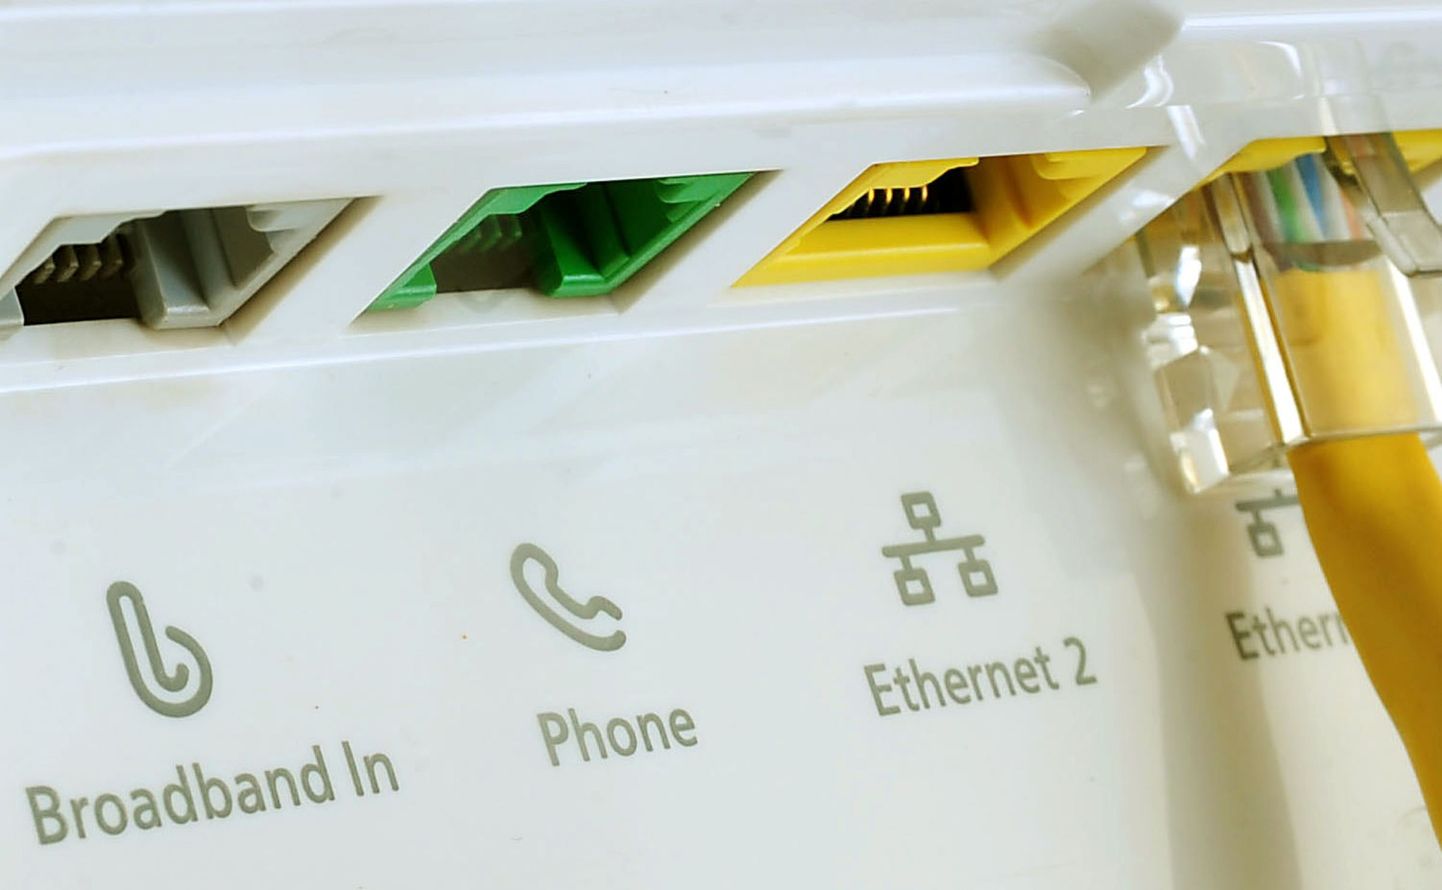 A general view of broadband router.